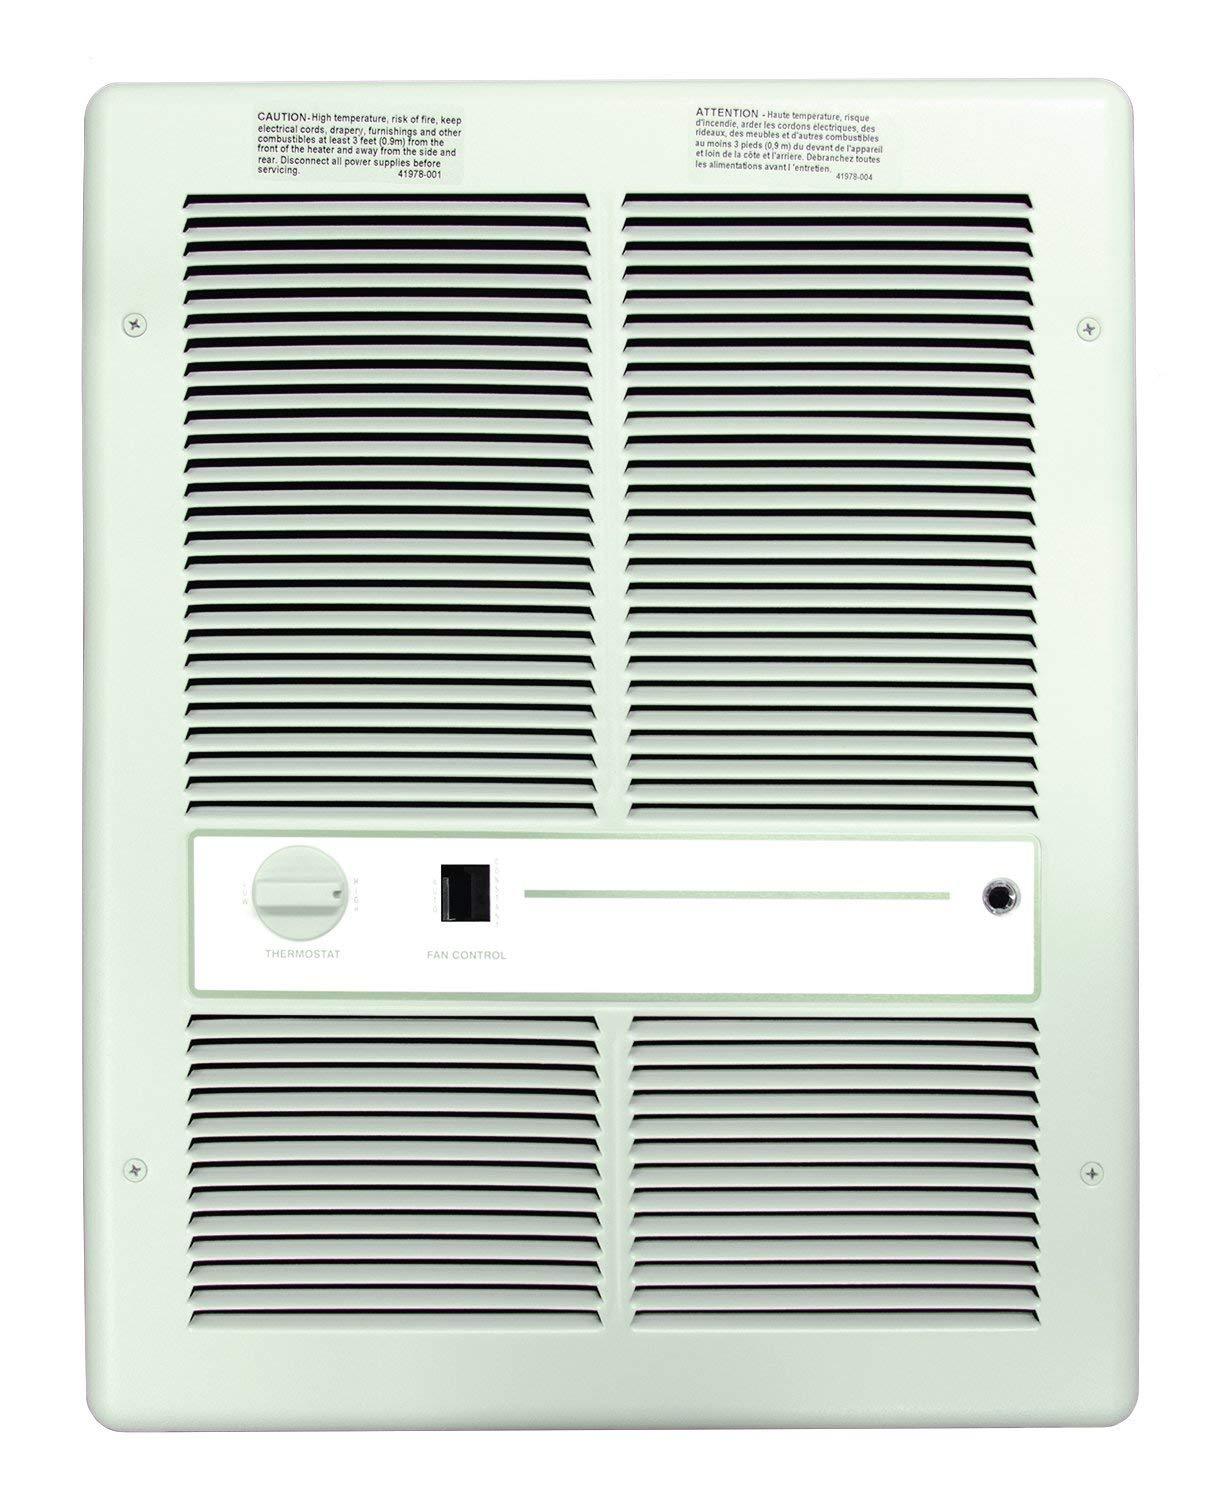 TPI 1500W 120V 3310 Series Fan Forced Wall Heater (White) - With Summer Fan Switch - 1 Pole Thermostat - E3313TSRPW